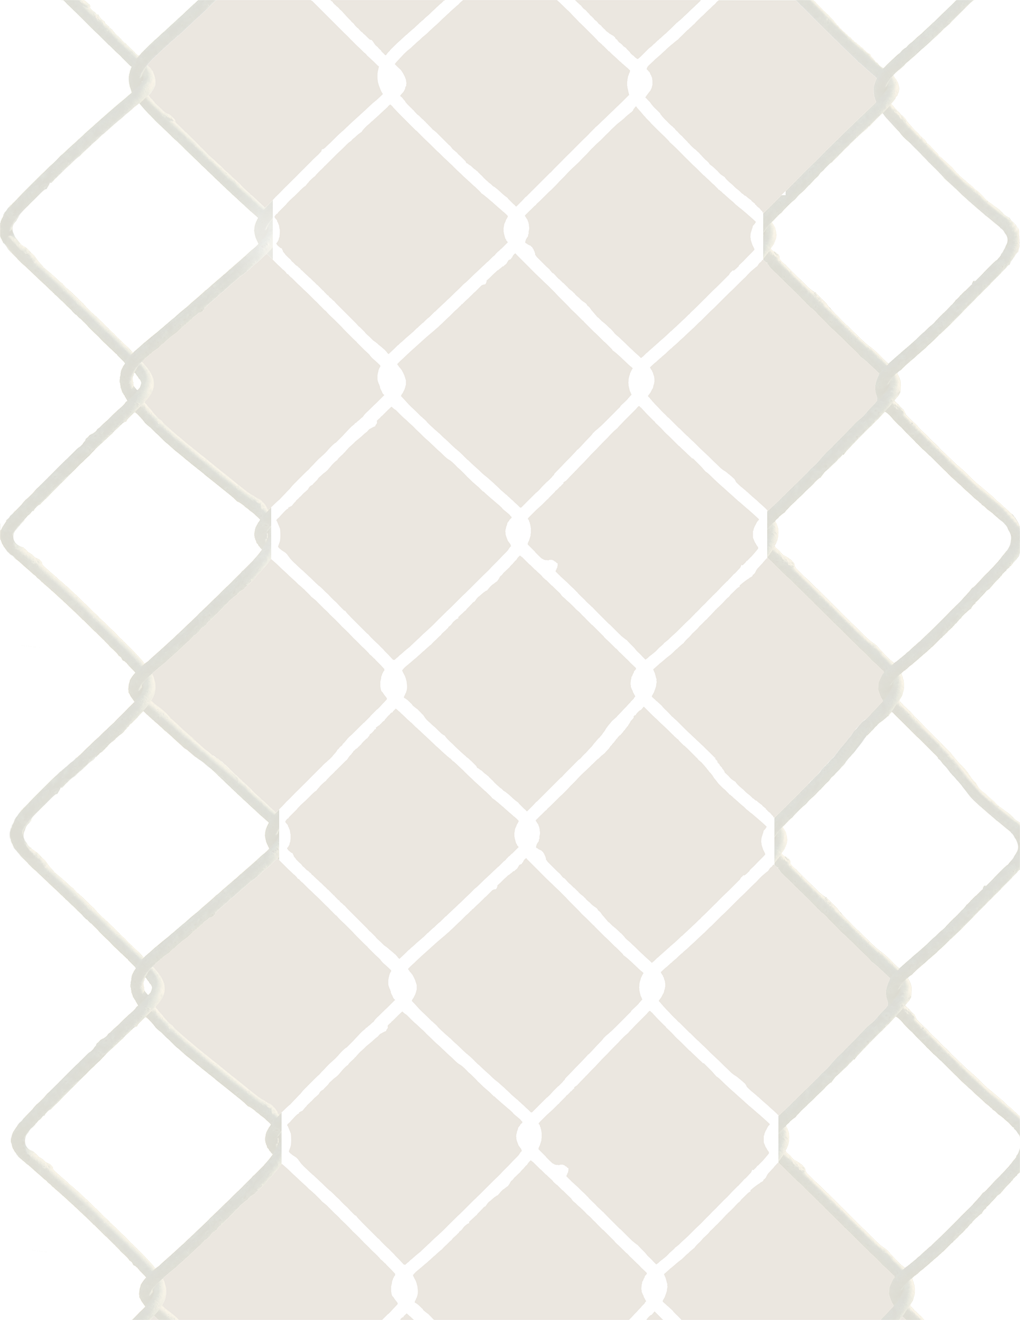 fence transparency